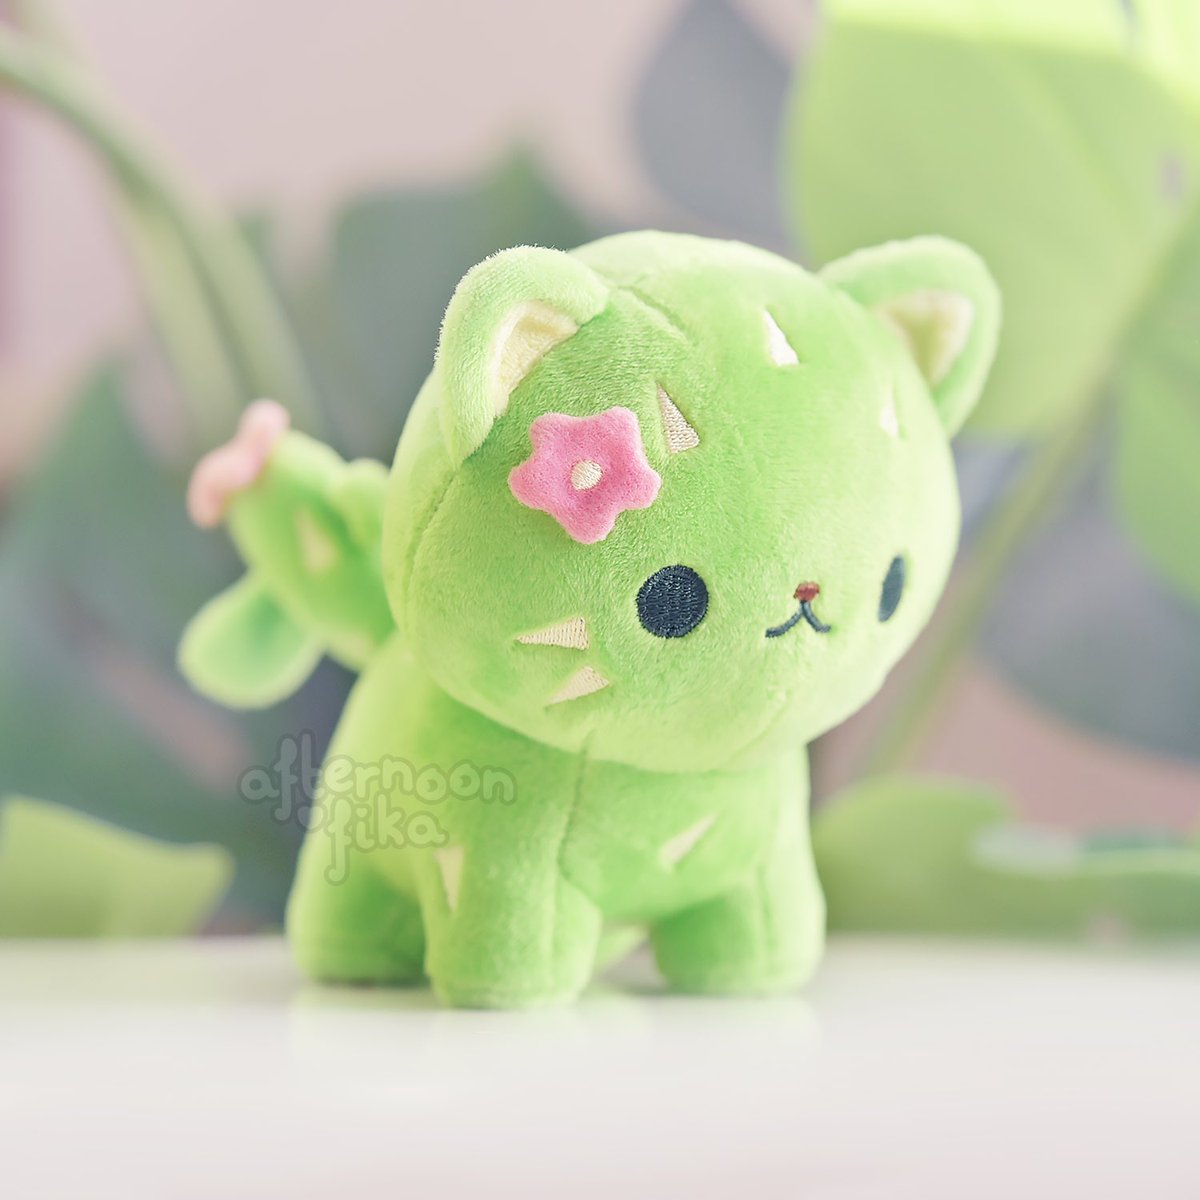 Ida Ꮚ•ꈊ•Ꮚ on X: Catcus plushies are finally up for adoption